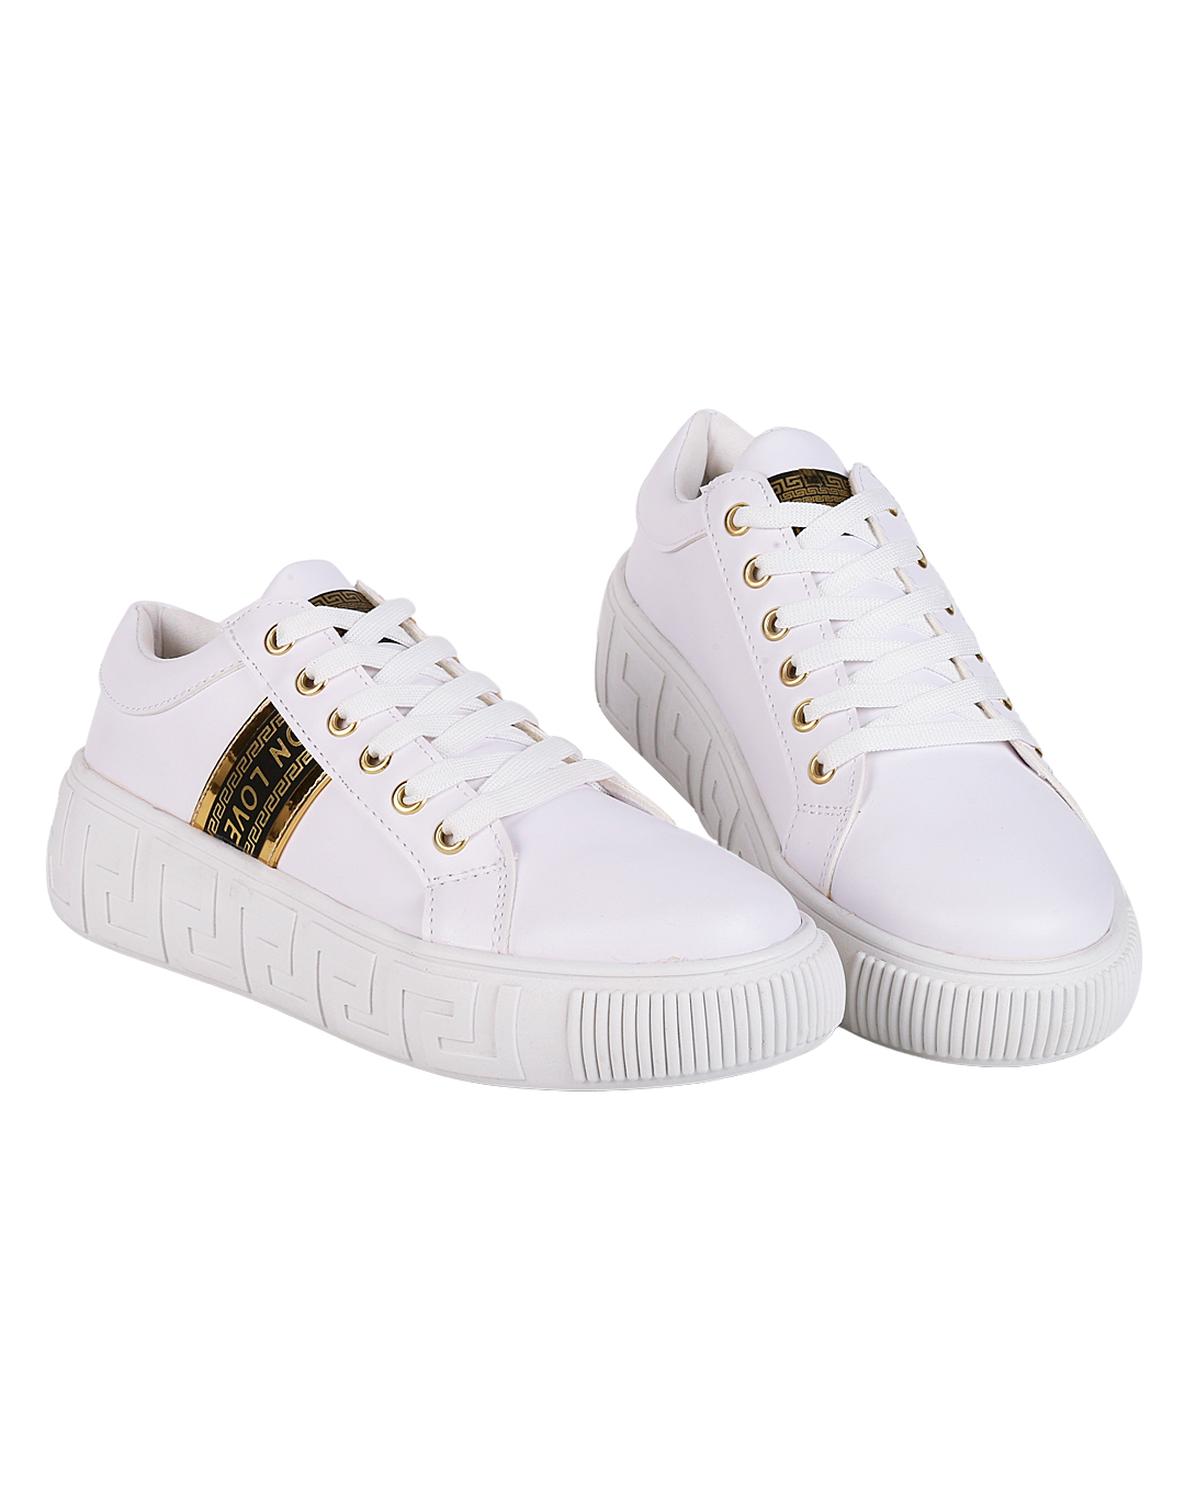 Tenis Casual Mujer Blanco Tacto Piel Been Class 12303909